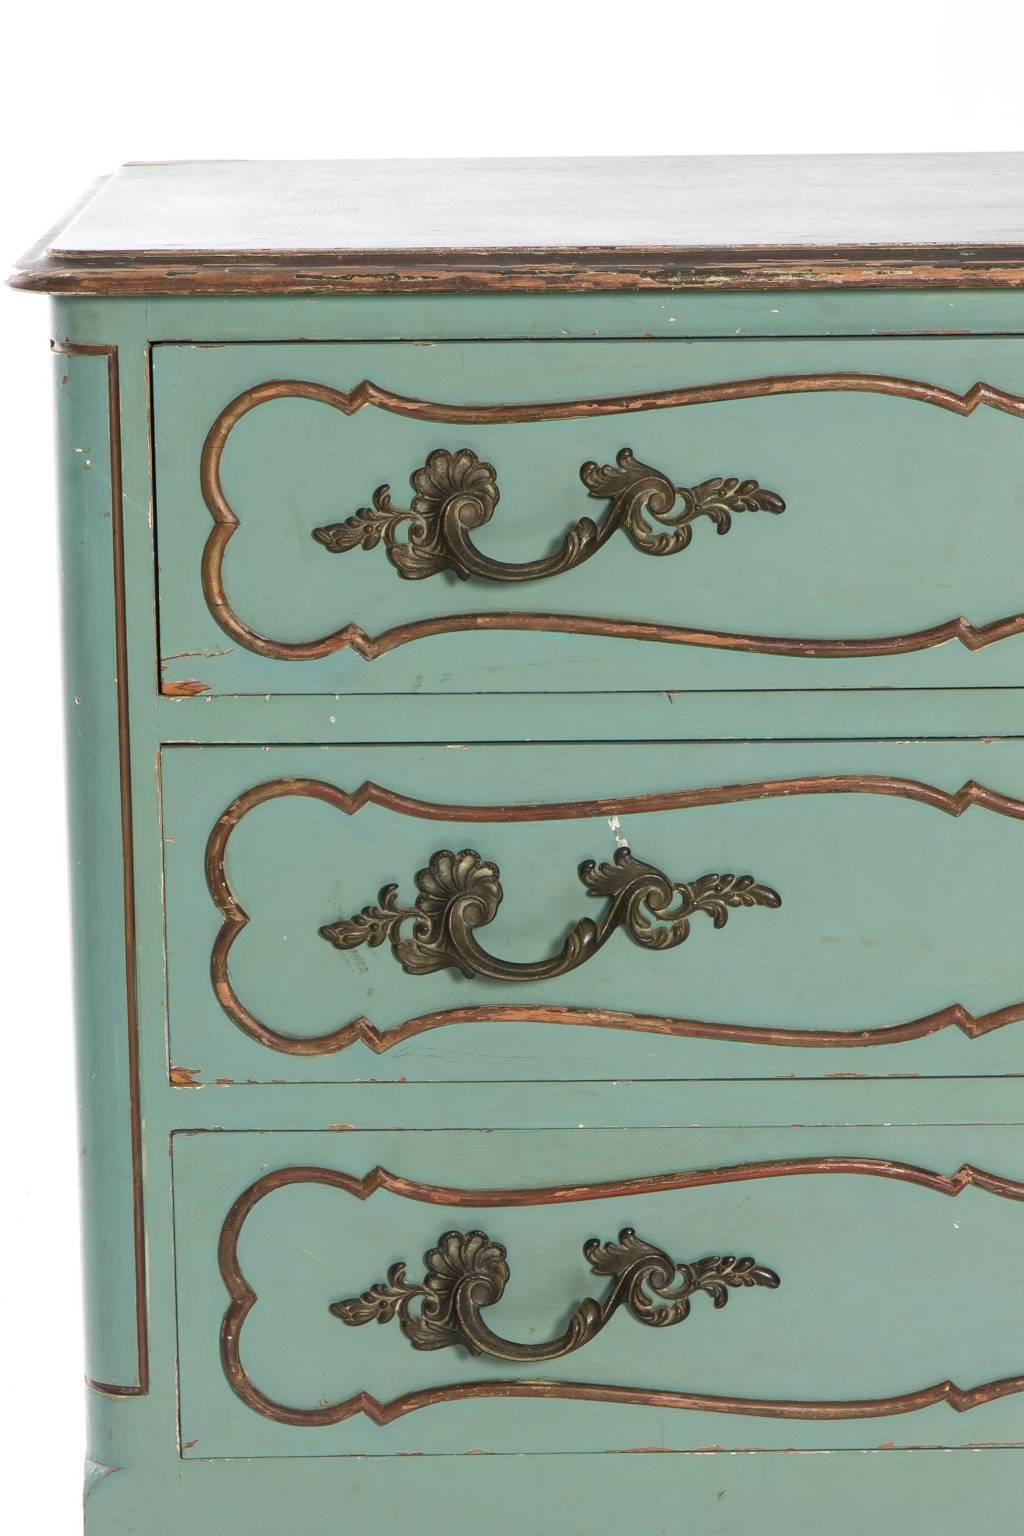 Louis XV style commode, painted in a blue green. Three drawers with bronze hardware.